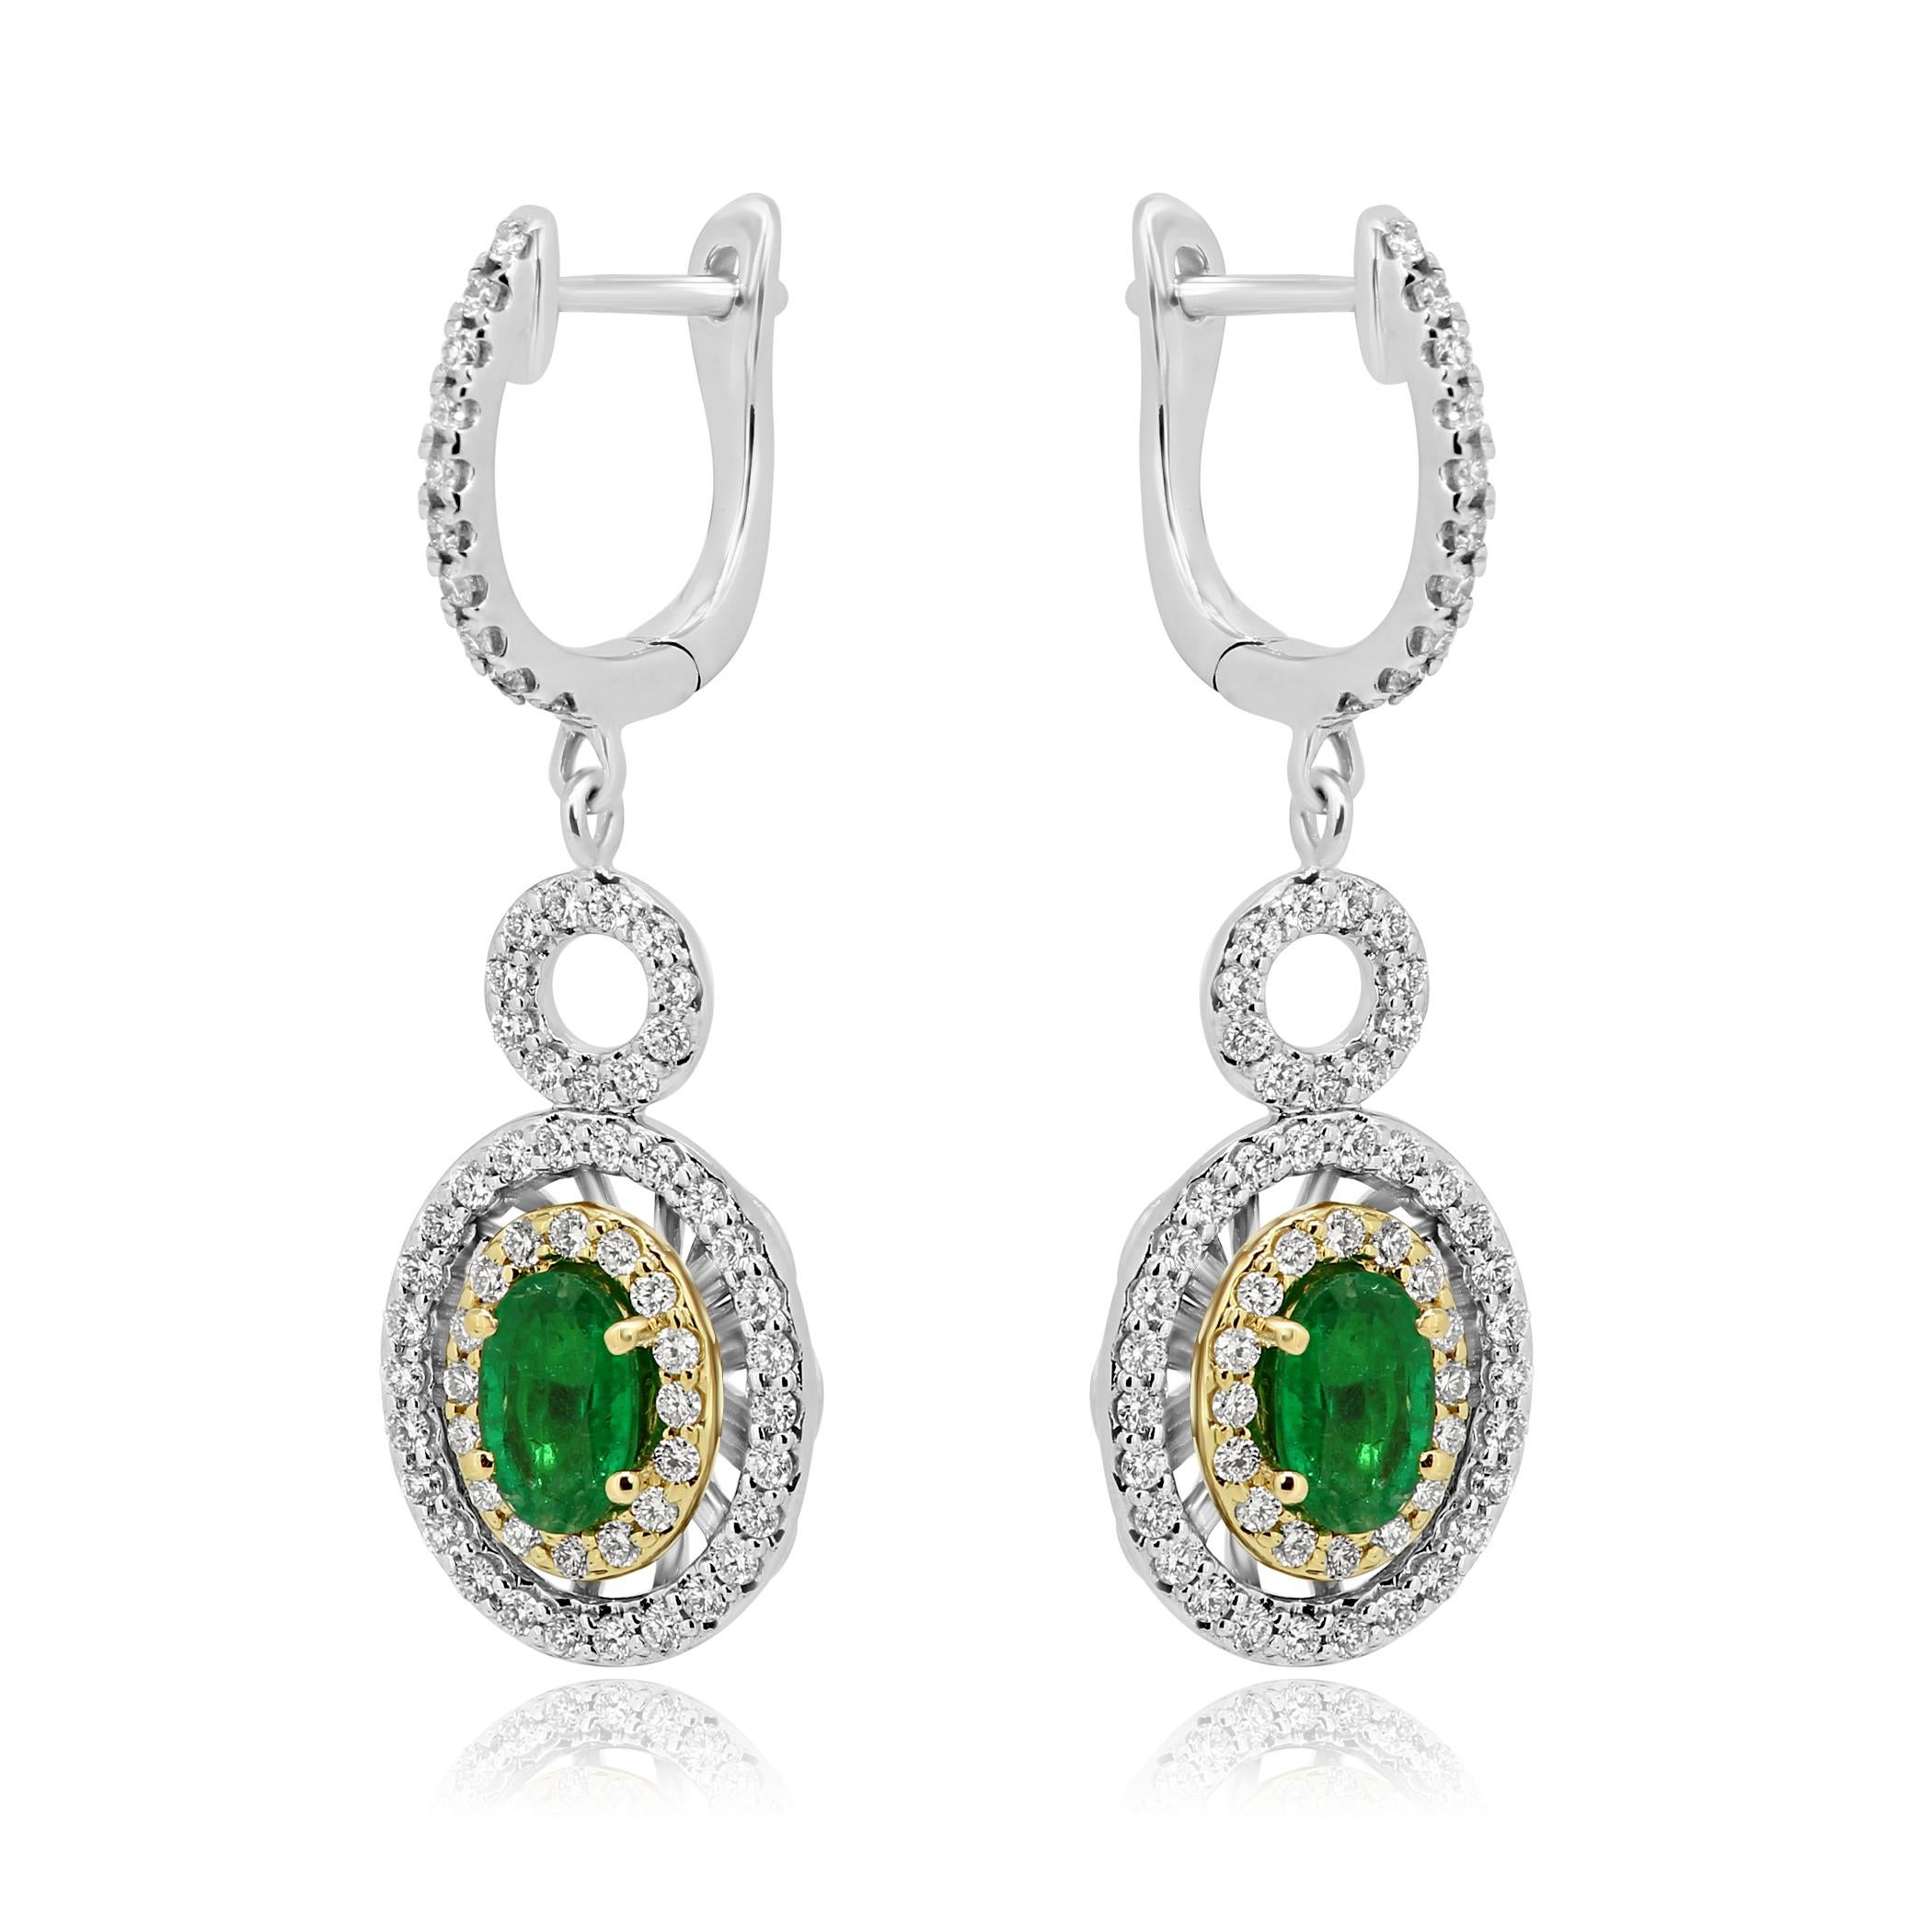 2 Emerald Oval 0.85 Carat Encircled in Double Halo of White G-H Color VS-SI Clarity Round Diamonds 0.90 Carat in 14K White and Yellow  Gold Dangle Drop Fashion Clip-On Earring.

Style available in different price ranges. Prices are based on your